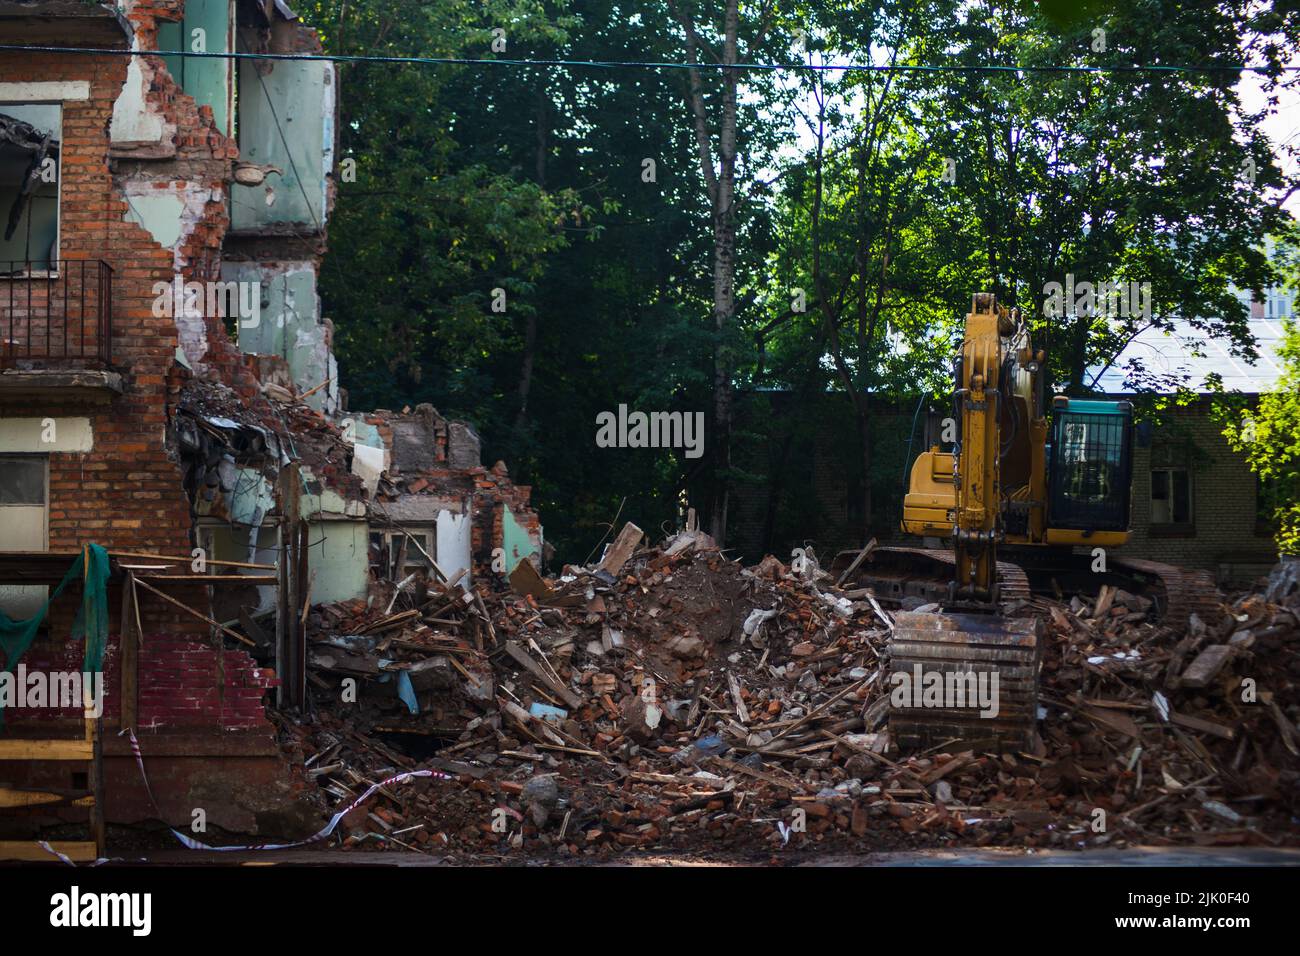 Demolition of a brick building with excavator mechanical arm. Destruction of dilapidated housing. Heavy machinery hydraulic construction equipment Stock Photo